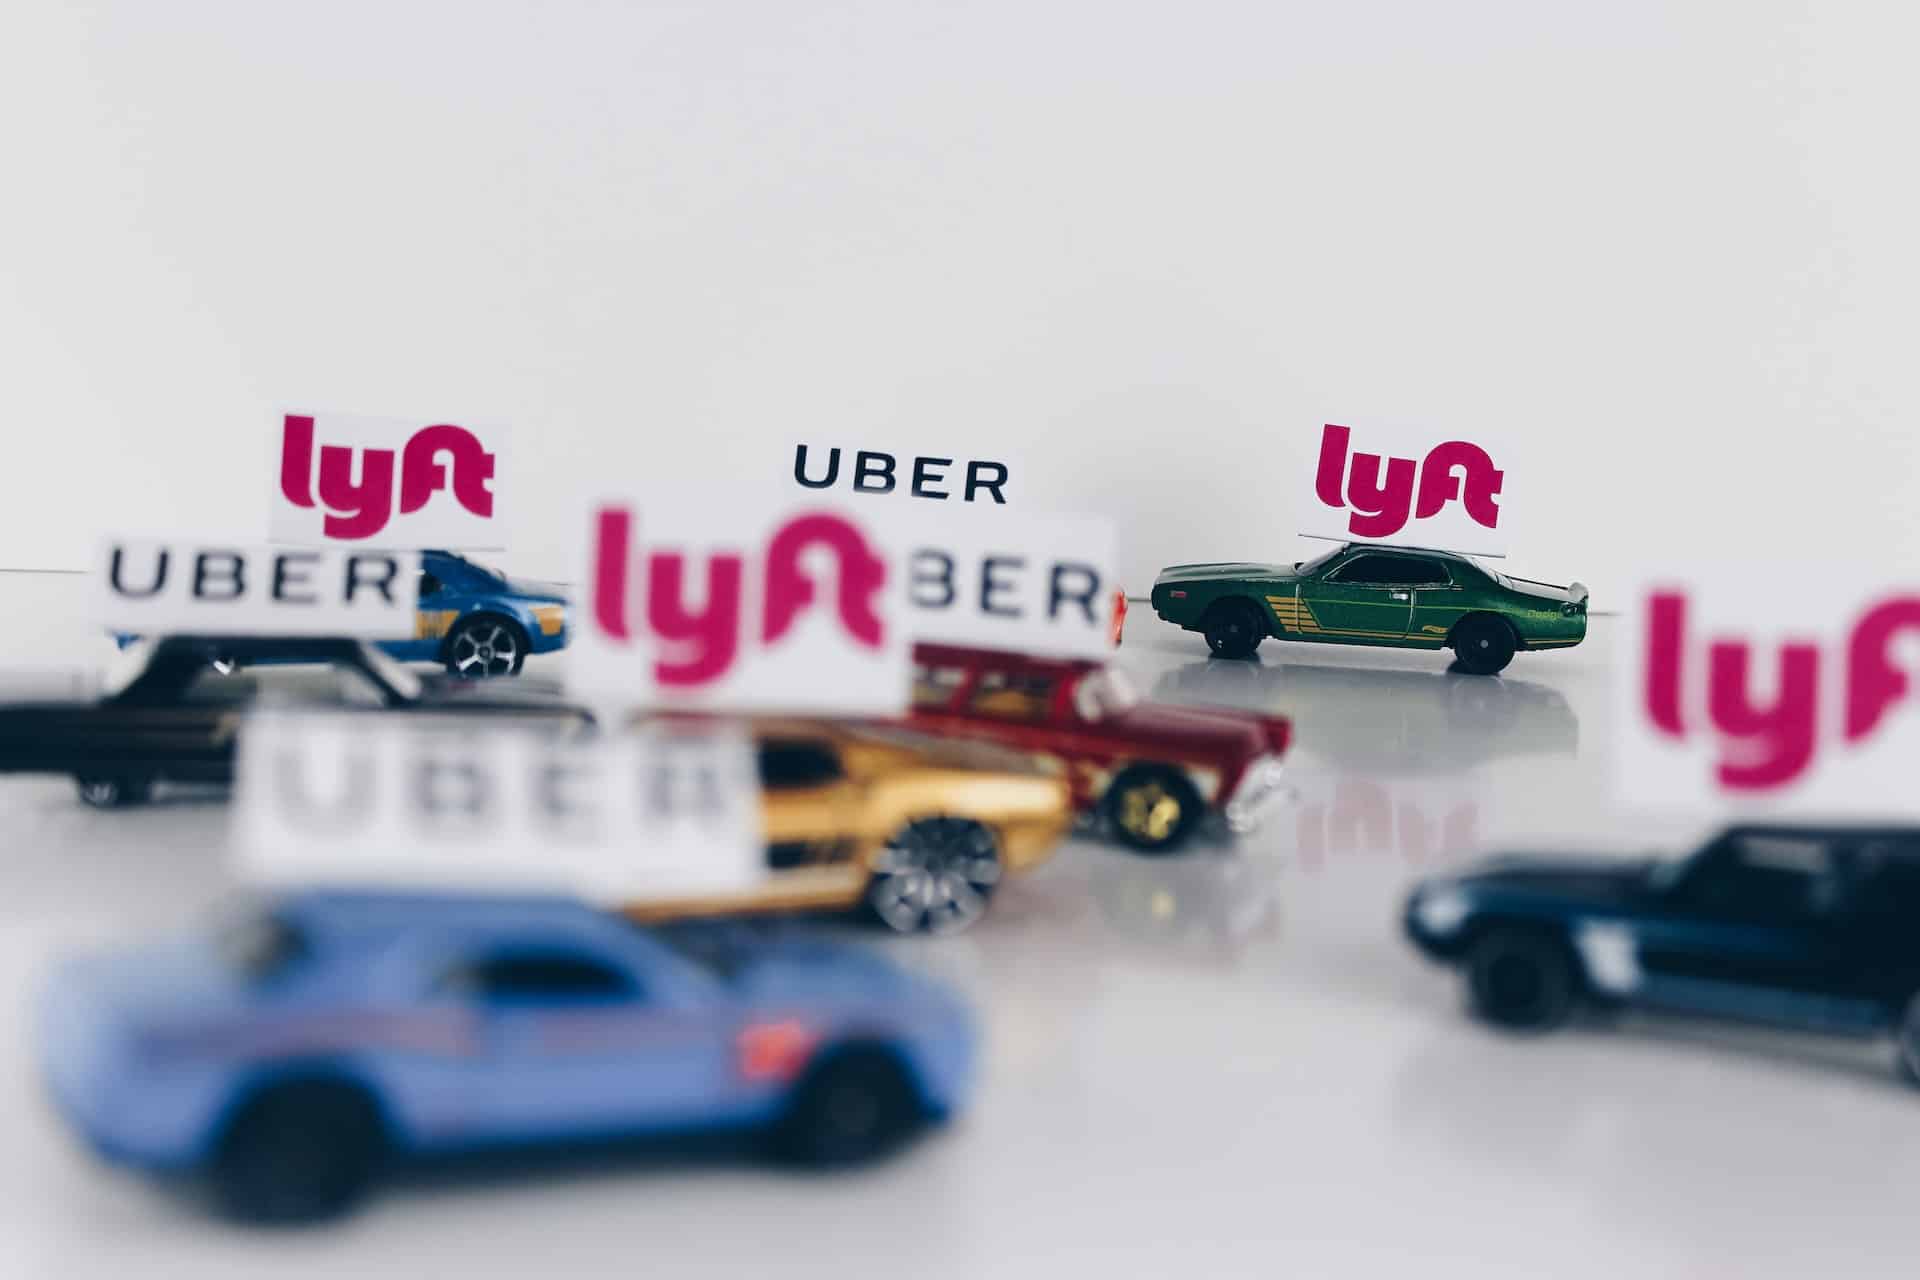 uber and lyft ride sharing cars